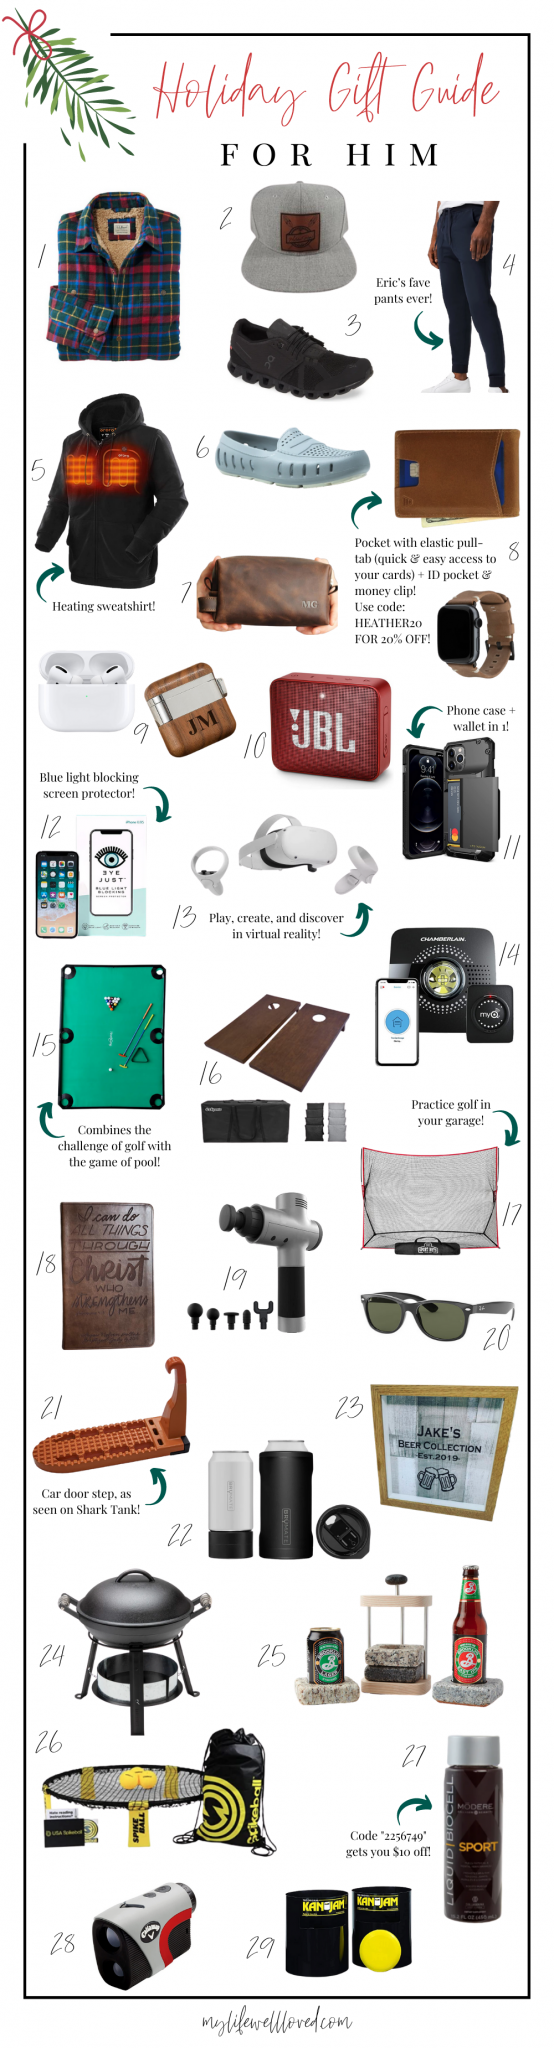 Mens Christmas Gift Ideas by Alabama Life + Style blogger, My Life Well Loved // Heather Brown 